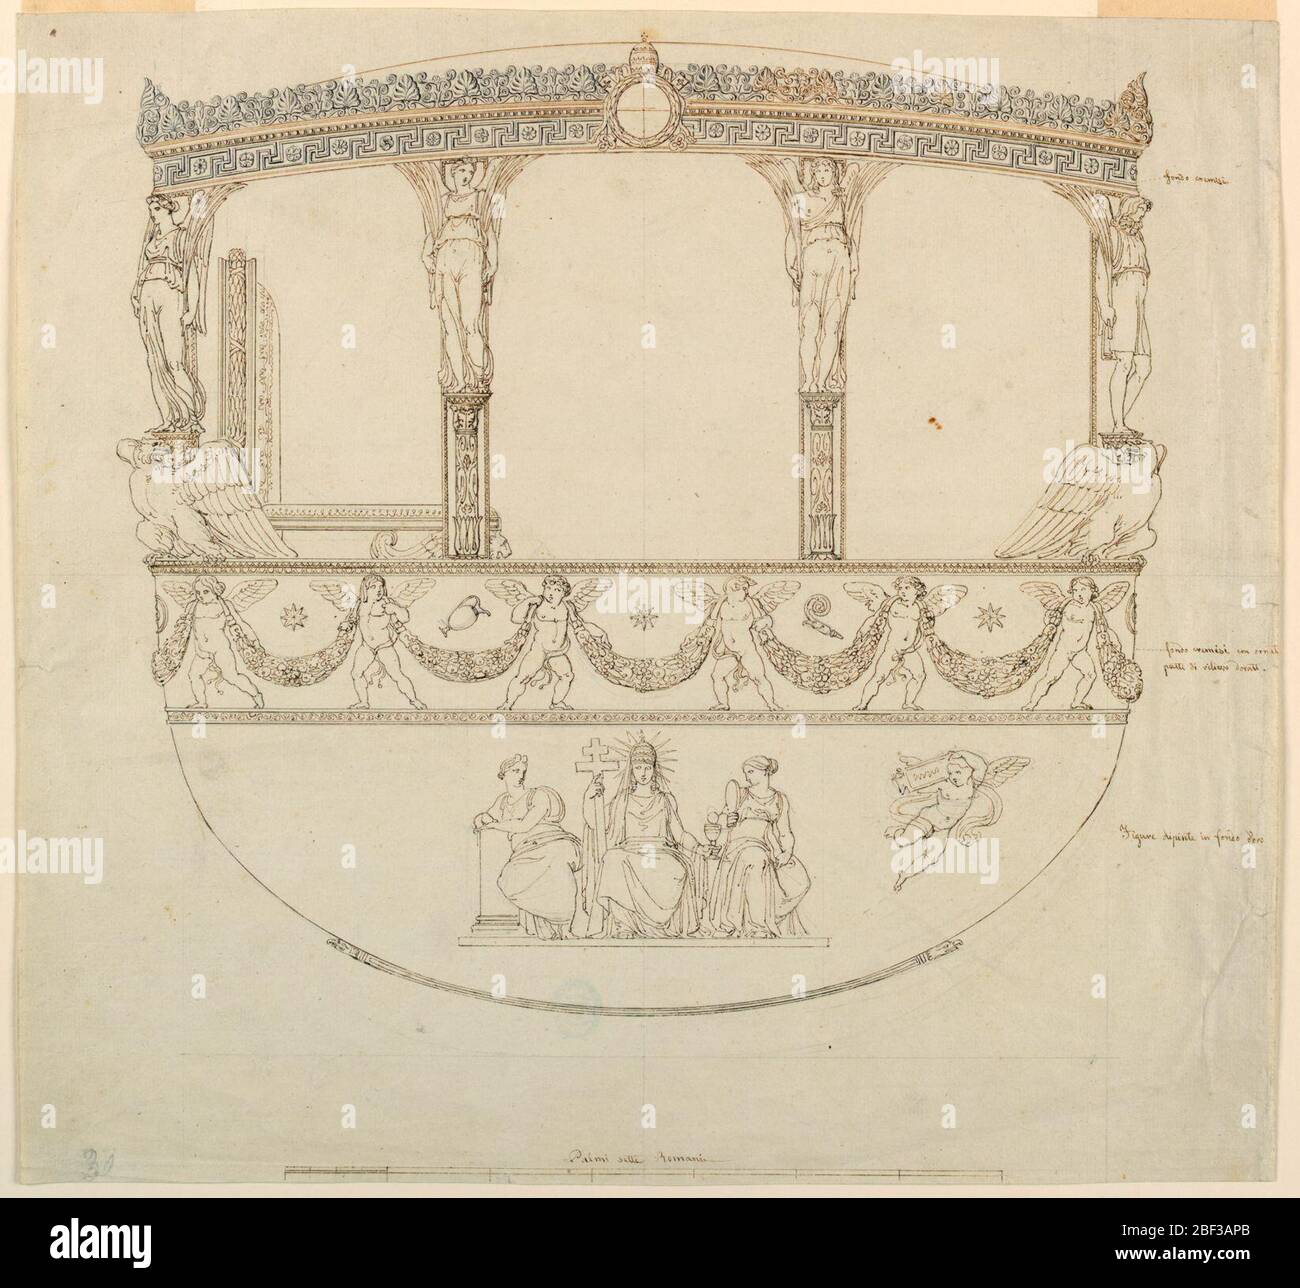 Design for Parts of a Coach. Vertical rectangle. Design for parts of a coach more probably of Pope Gregory XVI (1831-1846) than Pope Pius IX (1846-1878). Profile view of the side of the body opposite the entrance side. In the center of the frieze, papal escutcheon. Stock Photo